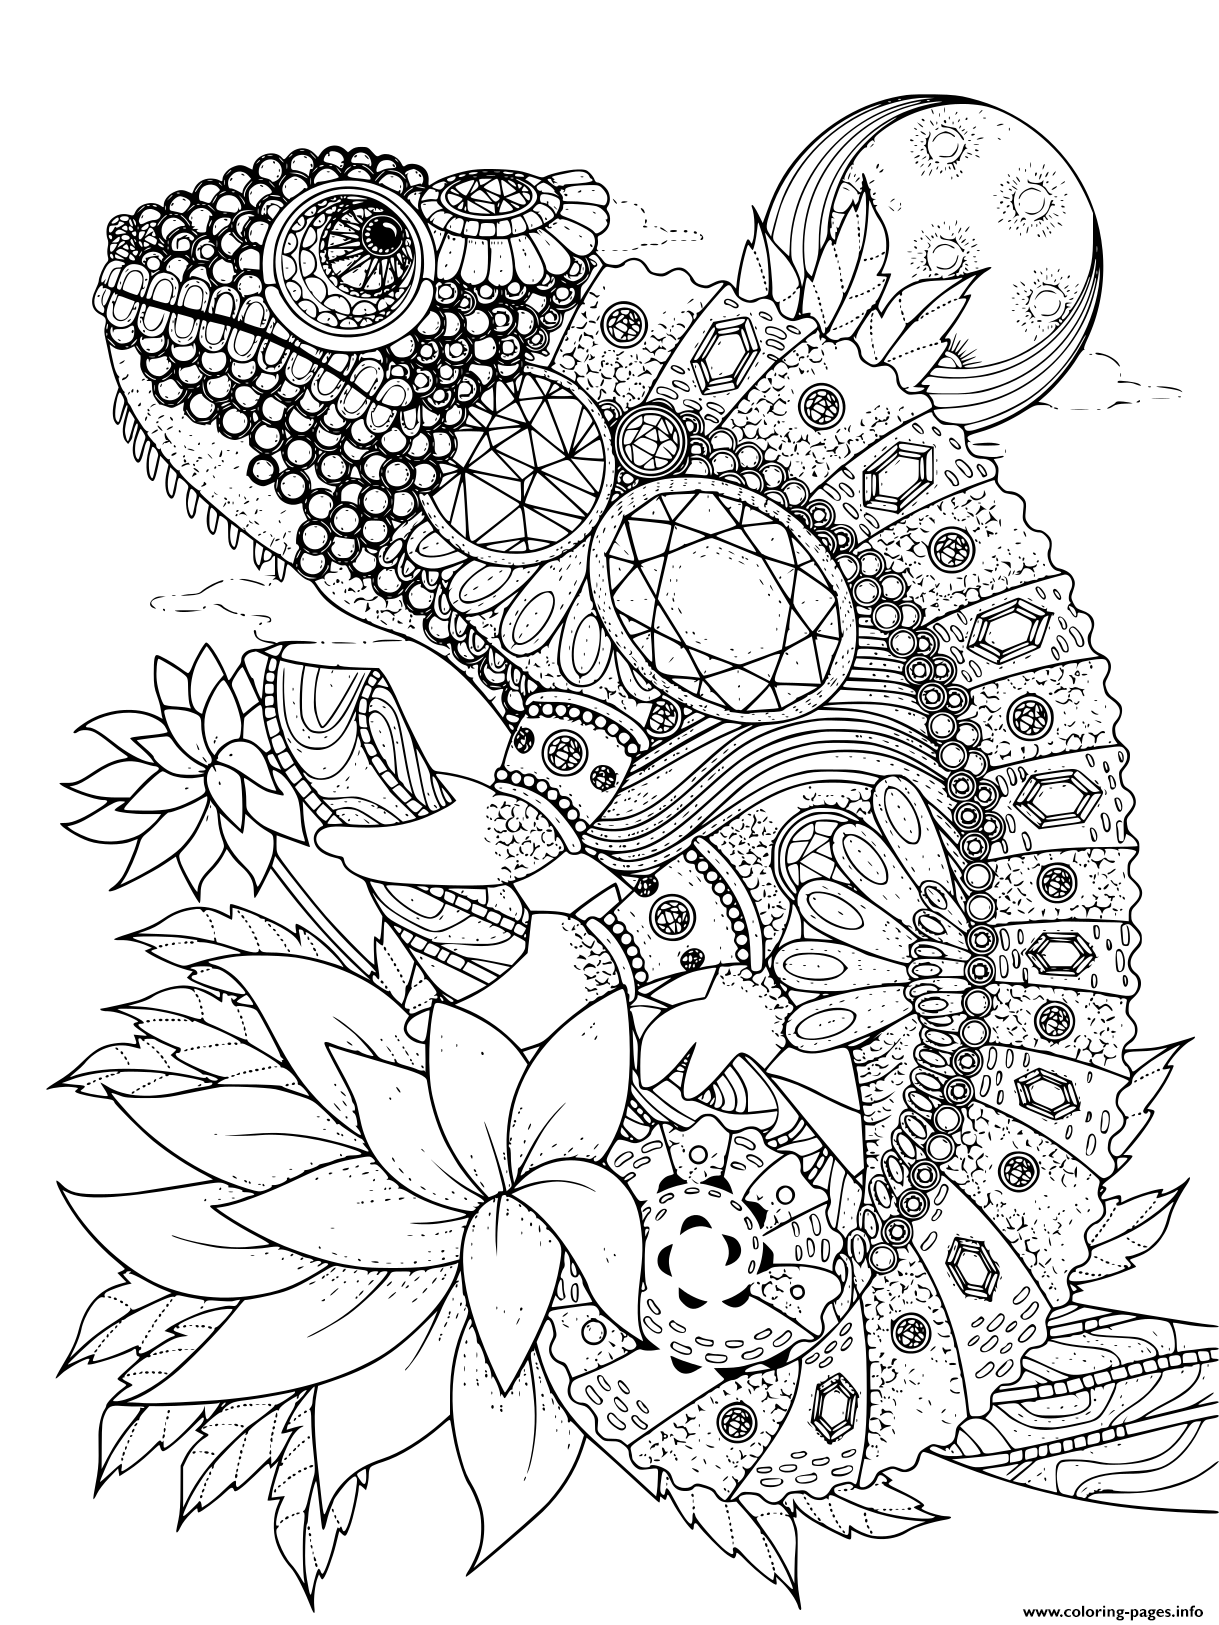 Adult Animal Chameleon Decorated To Jewelry coloring